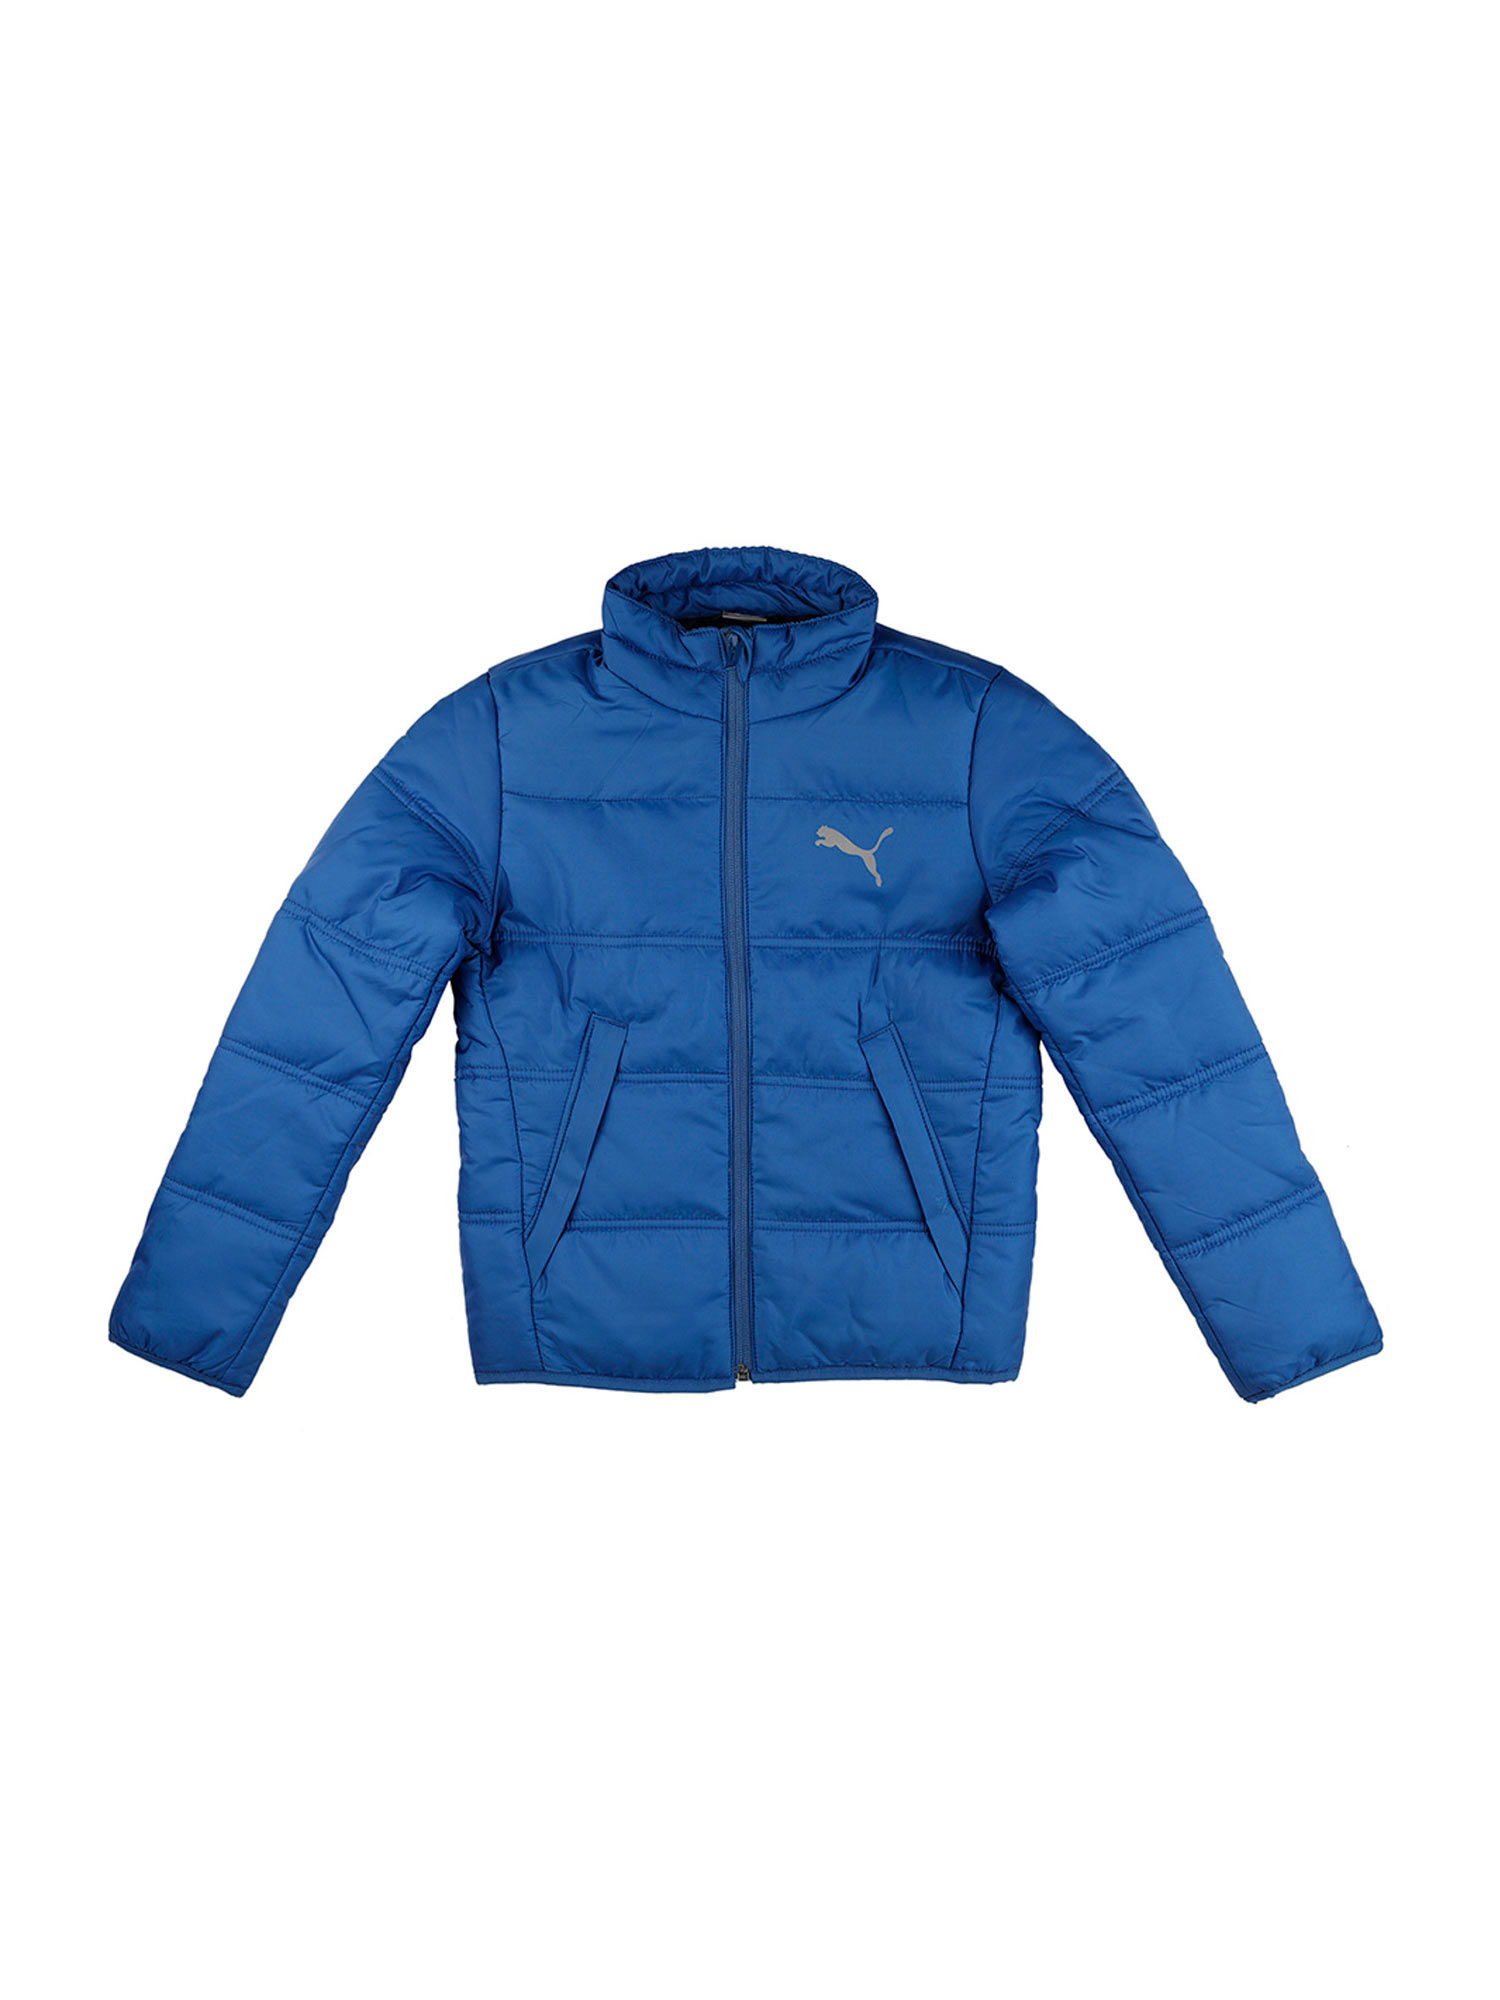 Mos koppeling Nuchter Puma Ess Padded Jacket B - Blue: Buy Puma Ess Padded Jacket B - Blue Online  at Best Price in India | Nykaa